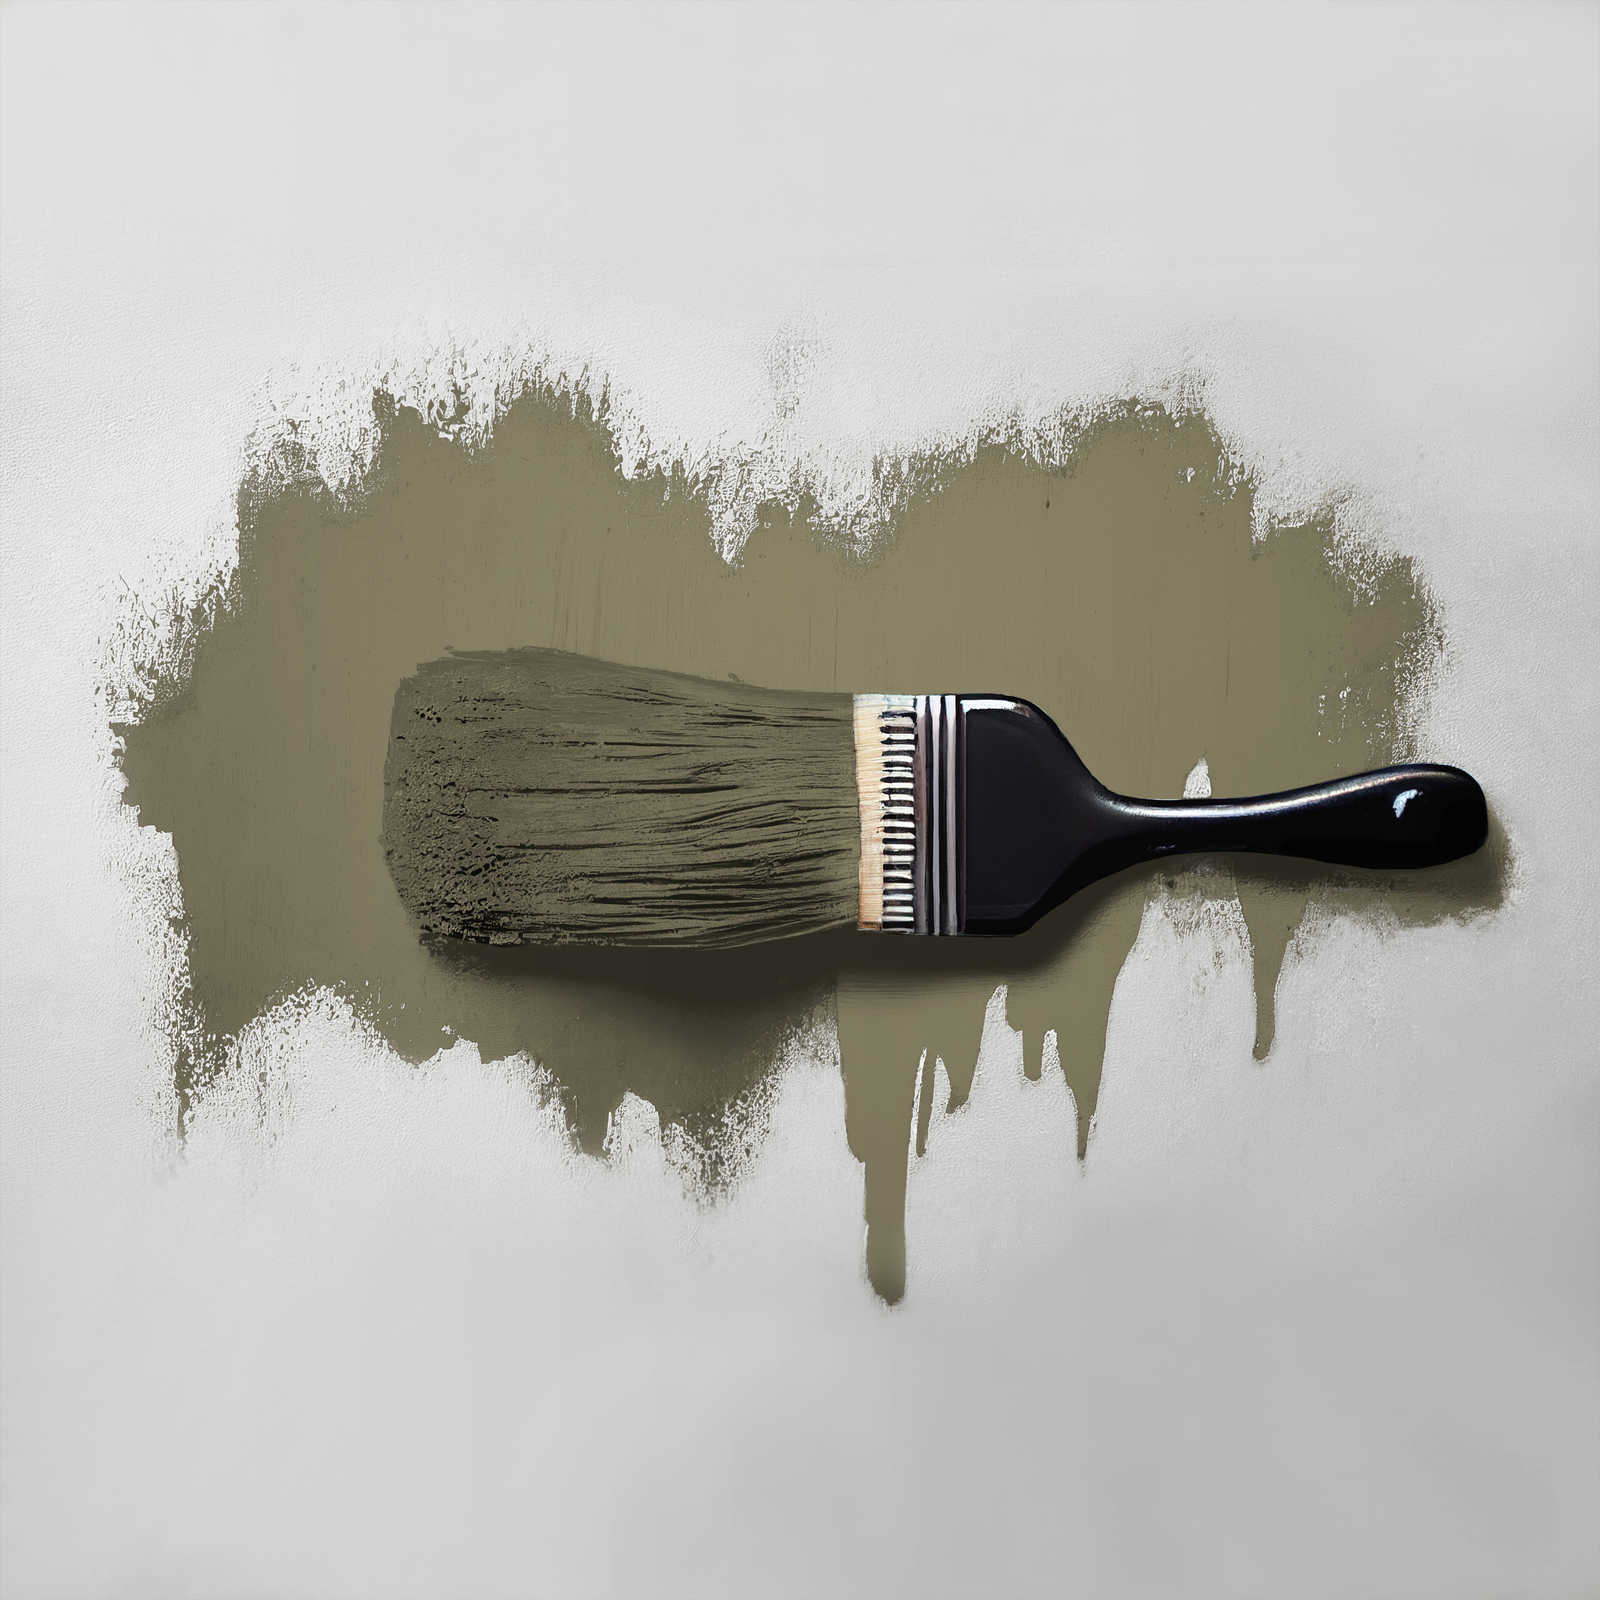             Wall Paint TCK4013 »Ordinary Olive« in intensive olive tone – 5,0 litre
        